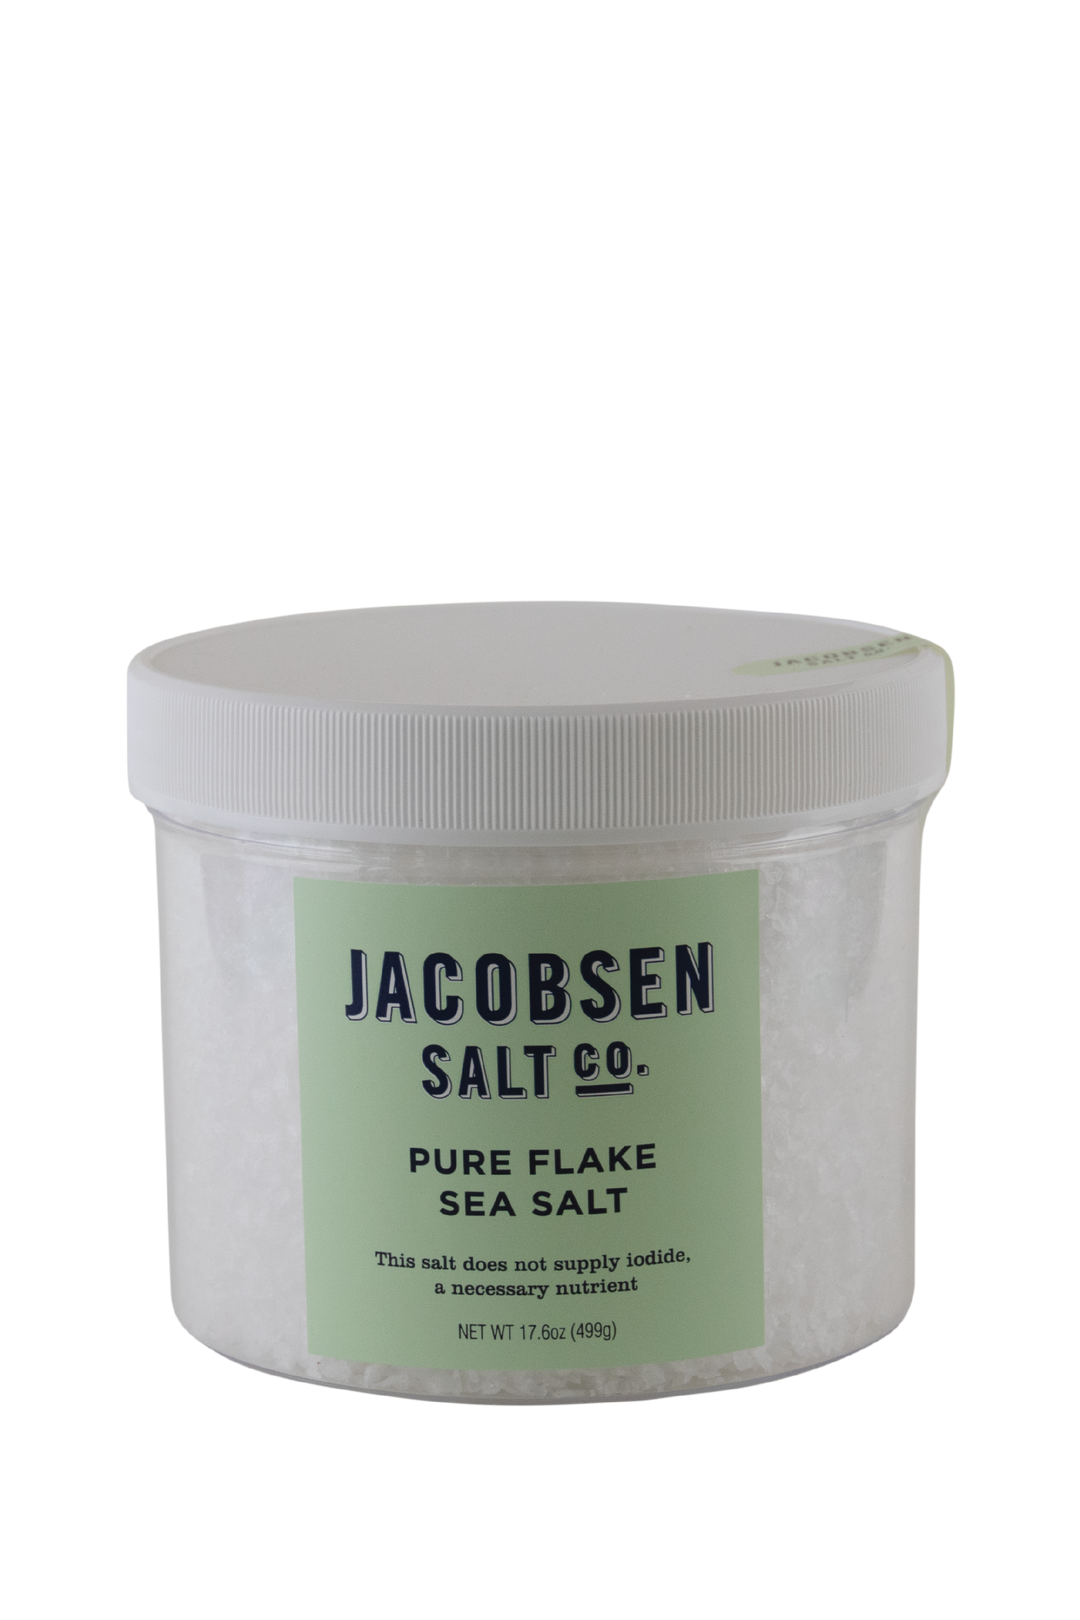 A Large Plastic Jar Of Jacobsen Salt Co's Pure Flake Sea Salt With Celeste Green Label and White Background. Label says "This salt does not supply iodide, a necessary nutrient."